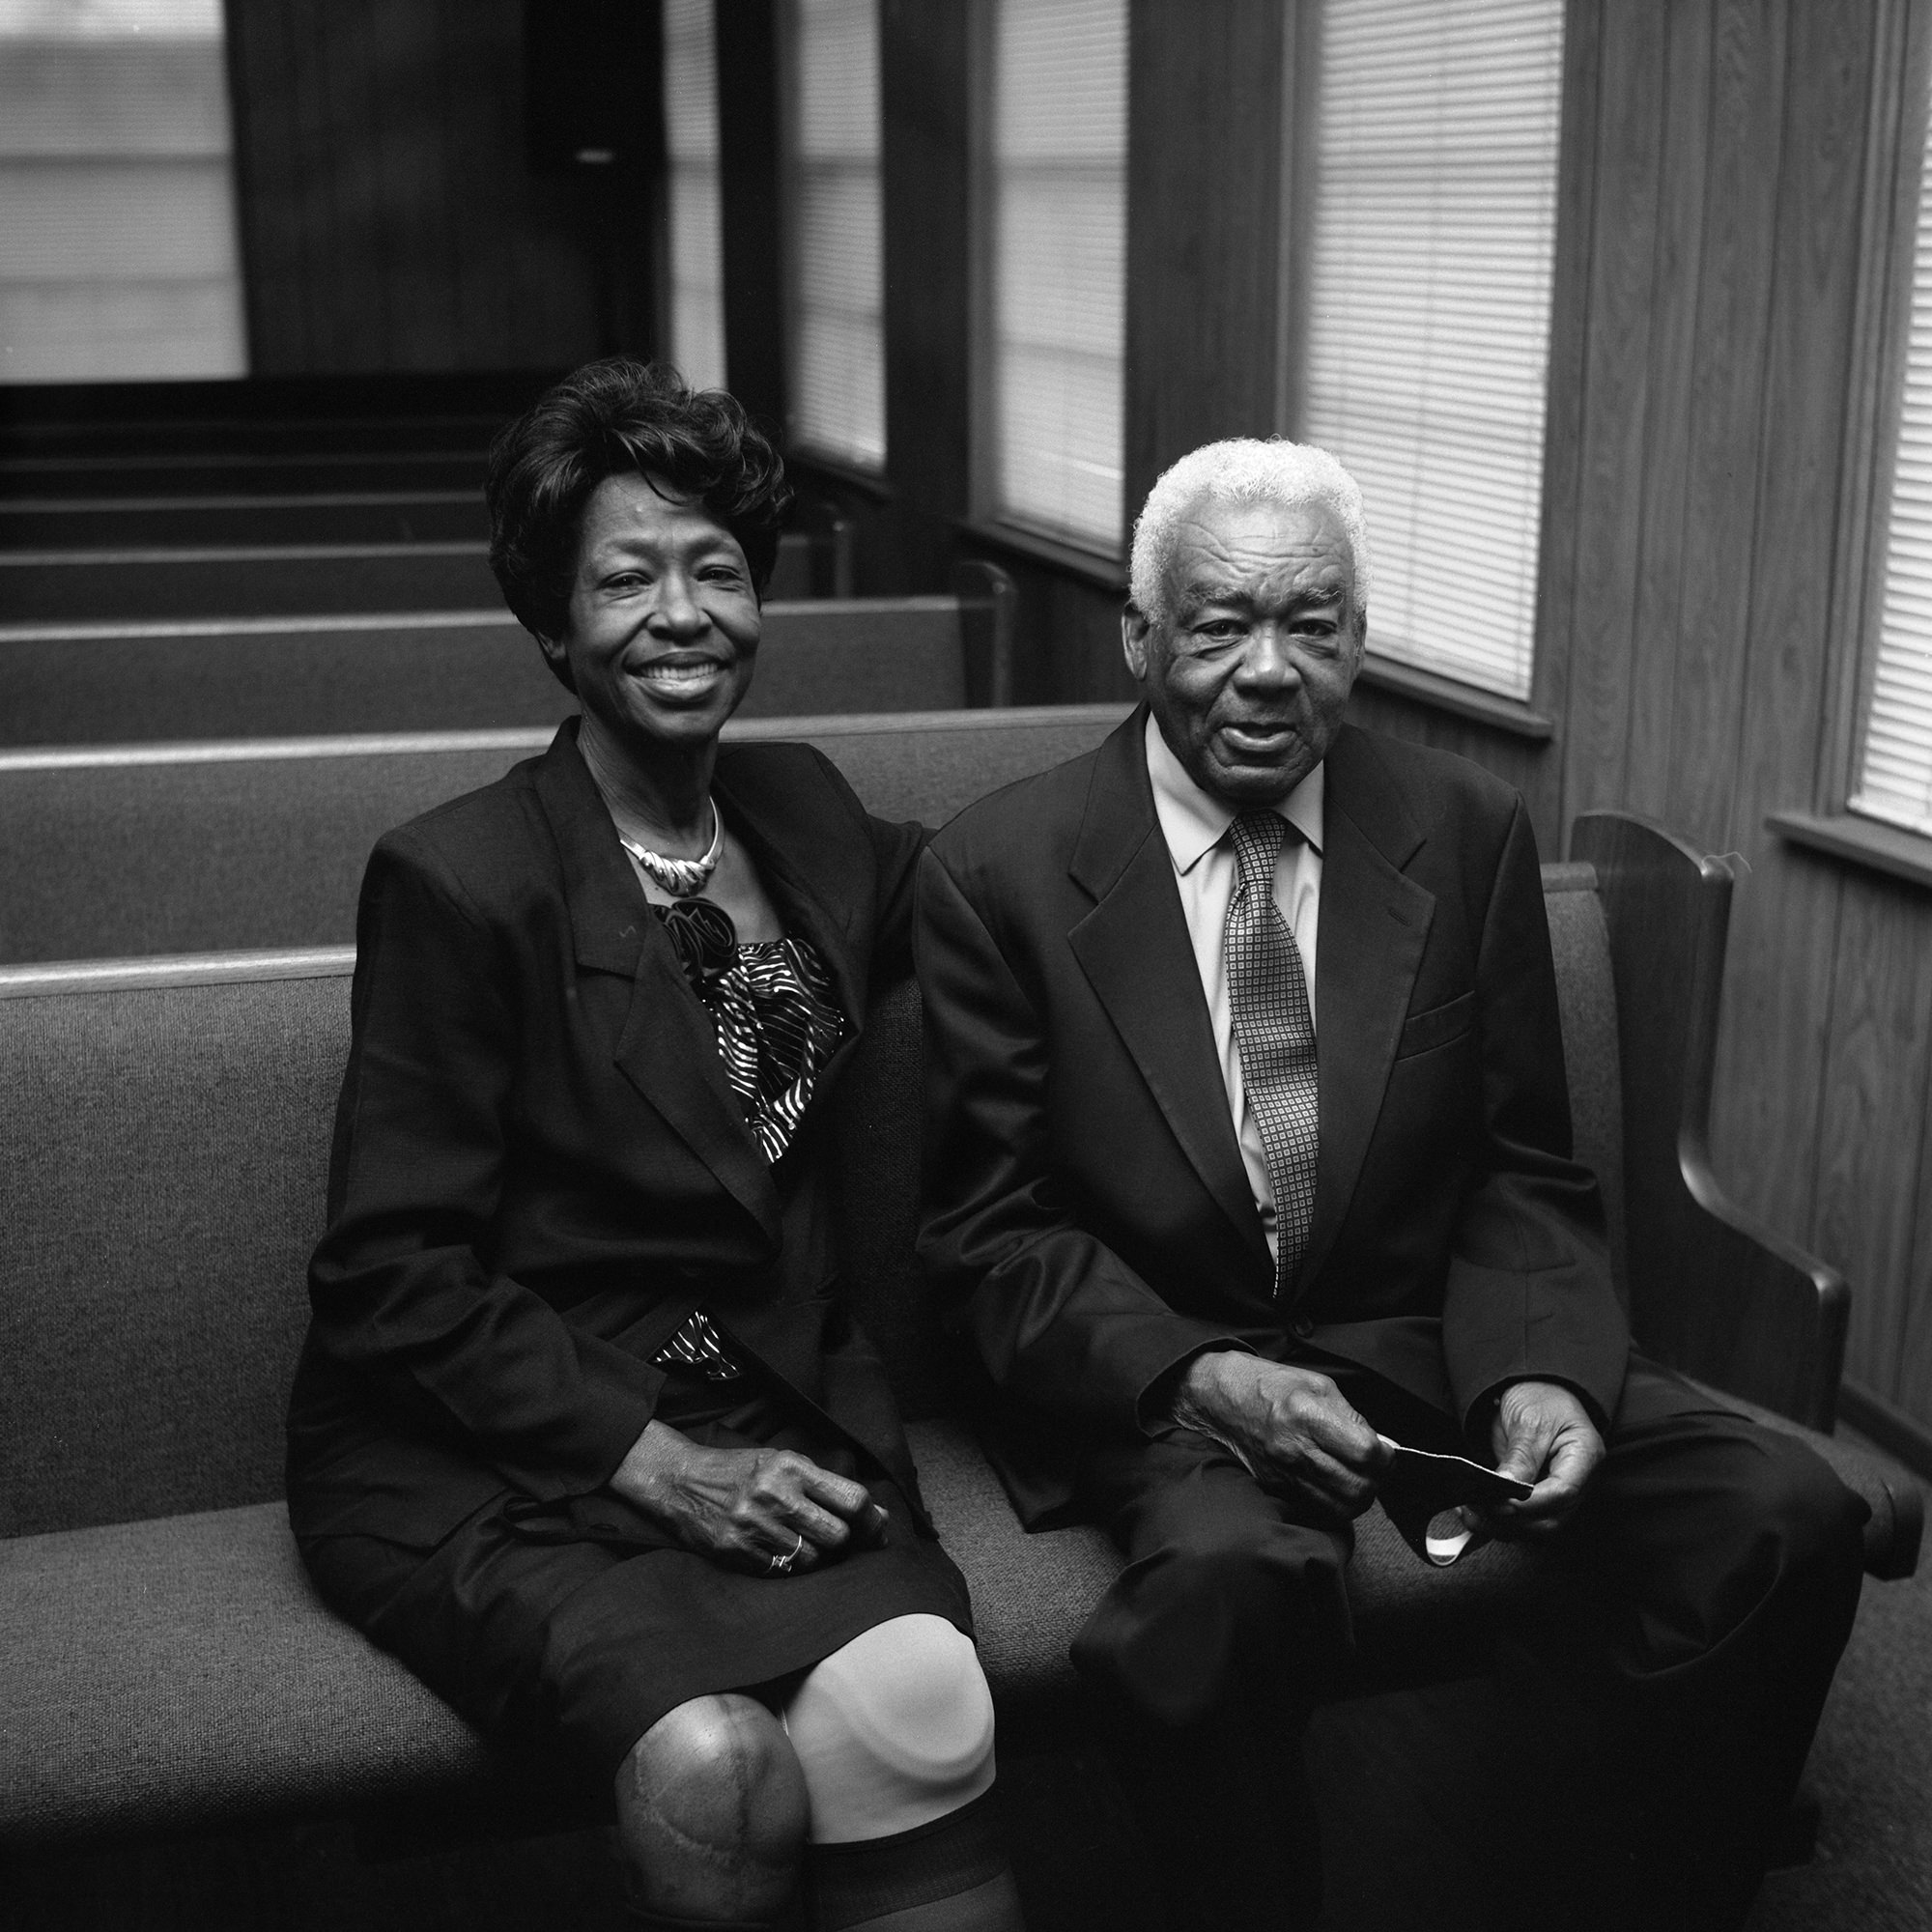 Image description: a black-and-white photograph of an elderly African American man (wearing a suit and tie) and woman (wearing a blazer, blouse, and skirt) seated in a church pew, smiling at the camera. Art by Rahim Fortune.